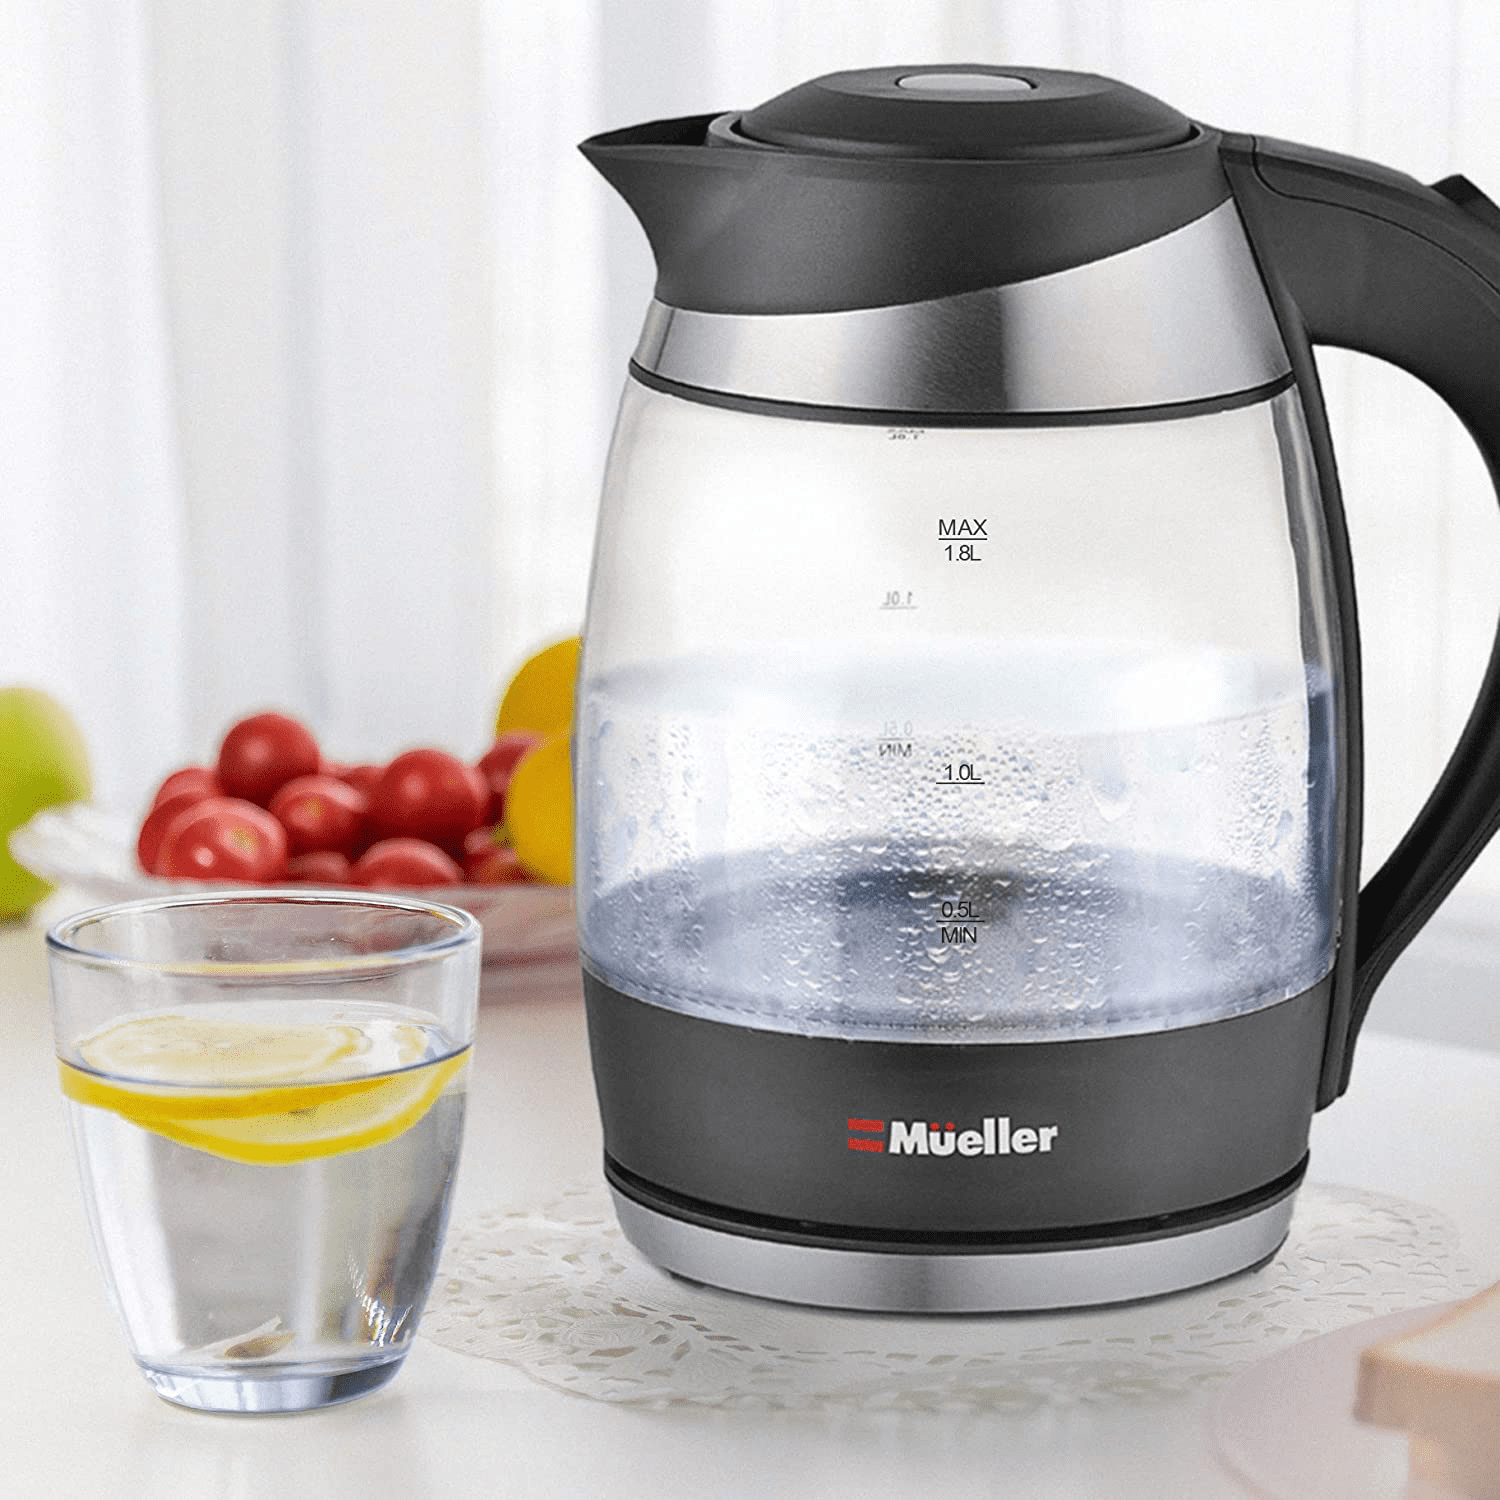 The Mueller Ultra Kettle Is on Sale at  Right Now